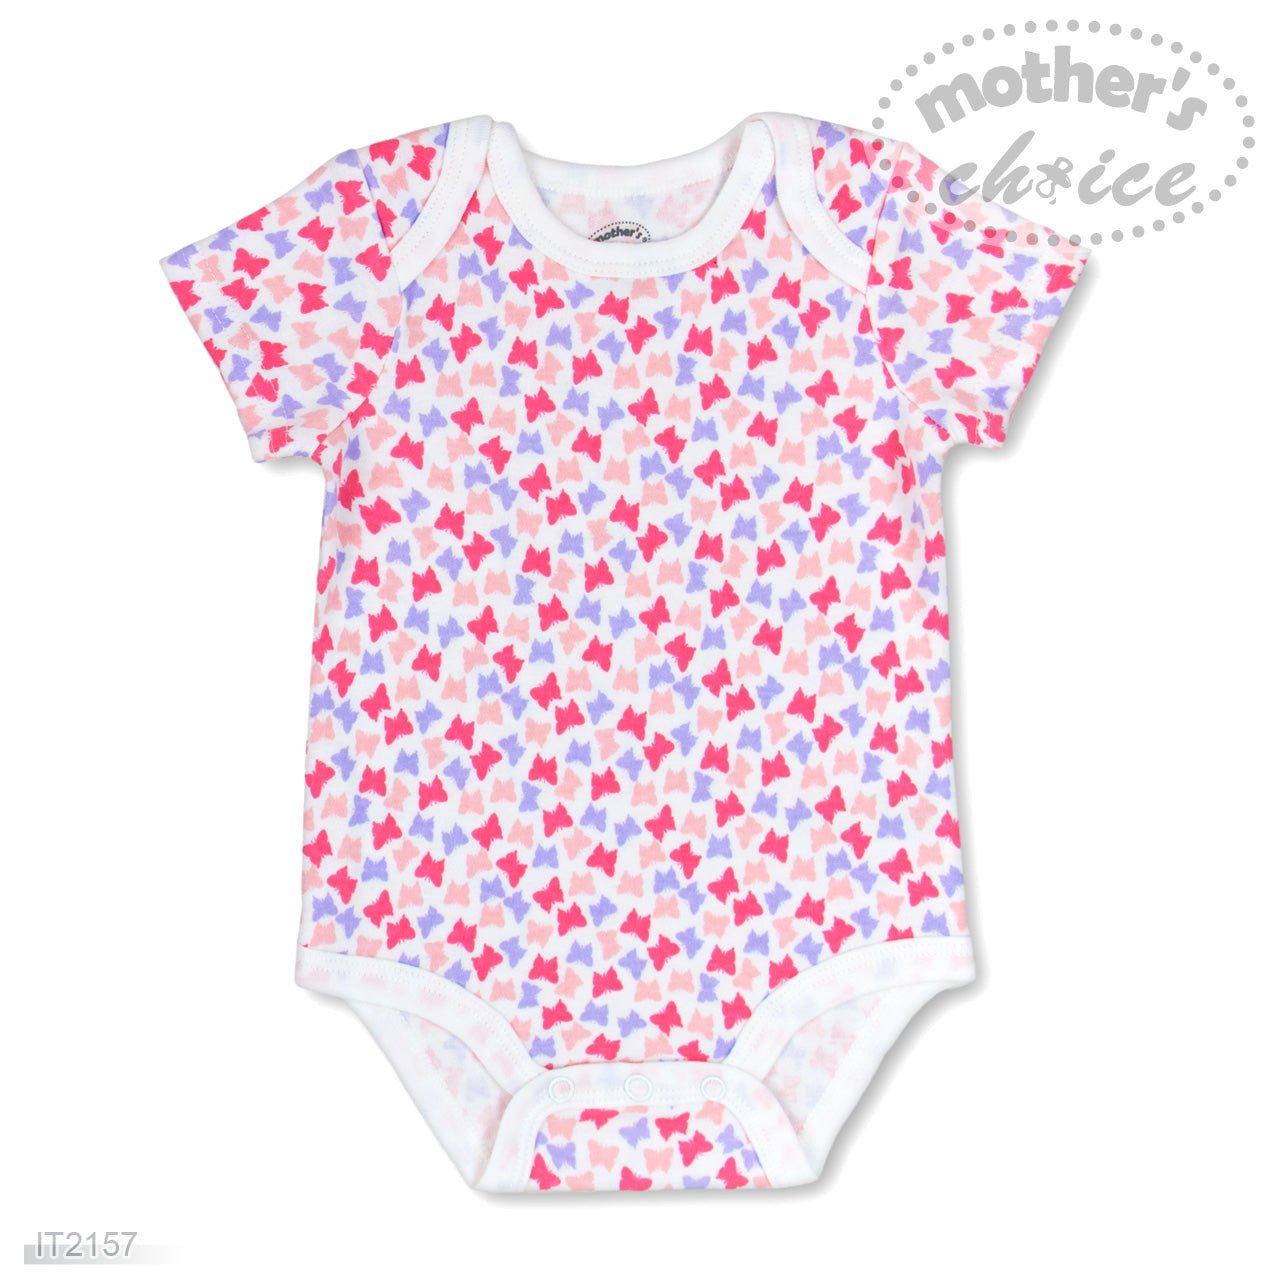 Mother's Choice 5 Pack Short Sleeve Onesie (Born to Fly/ IT2157)